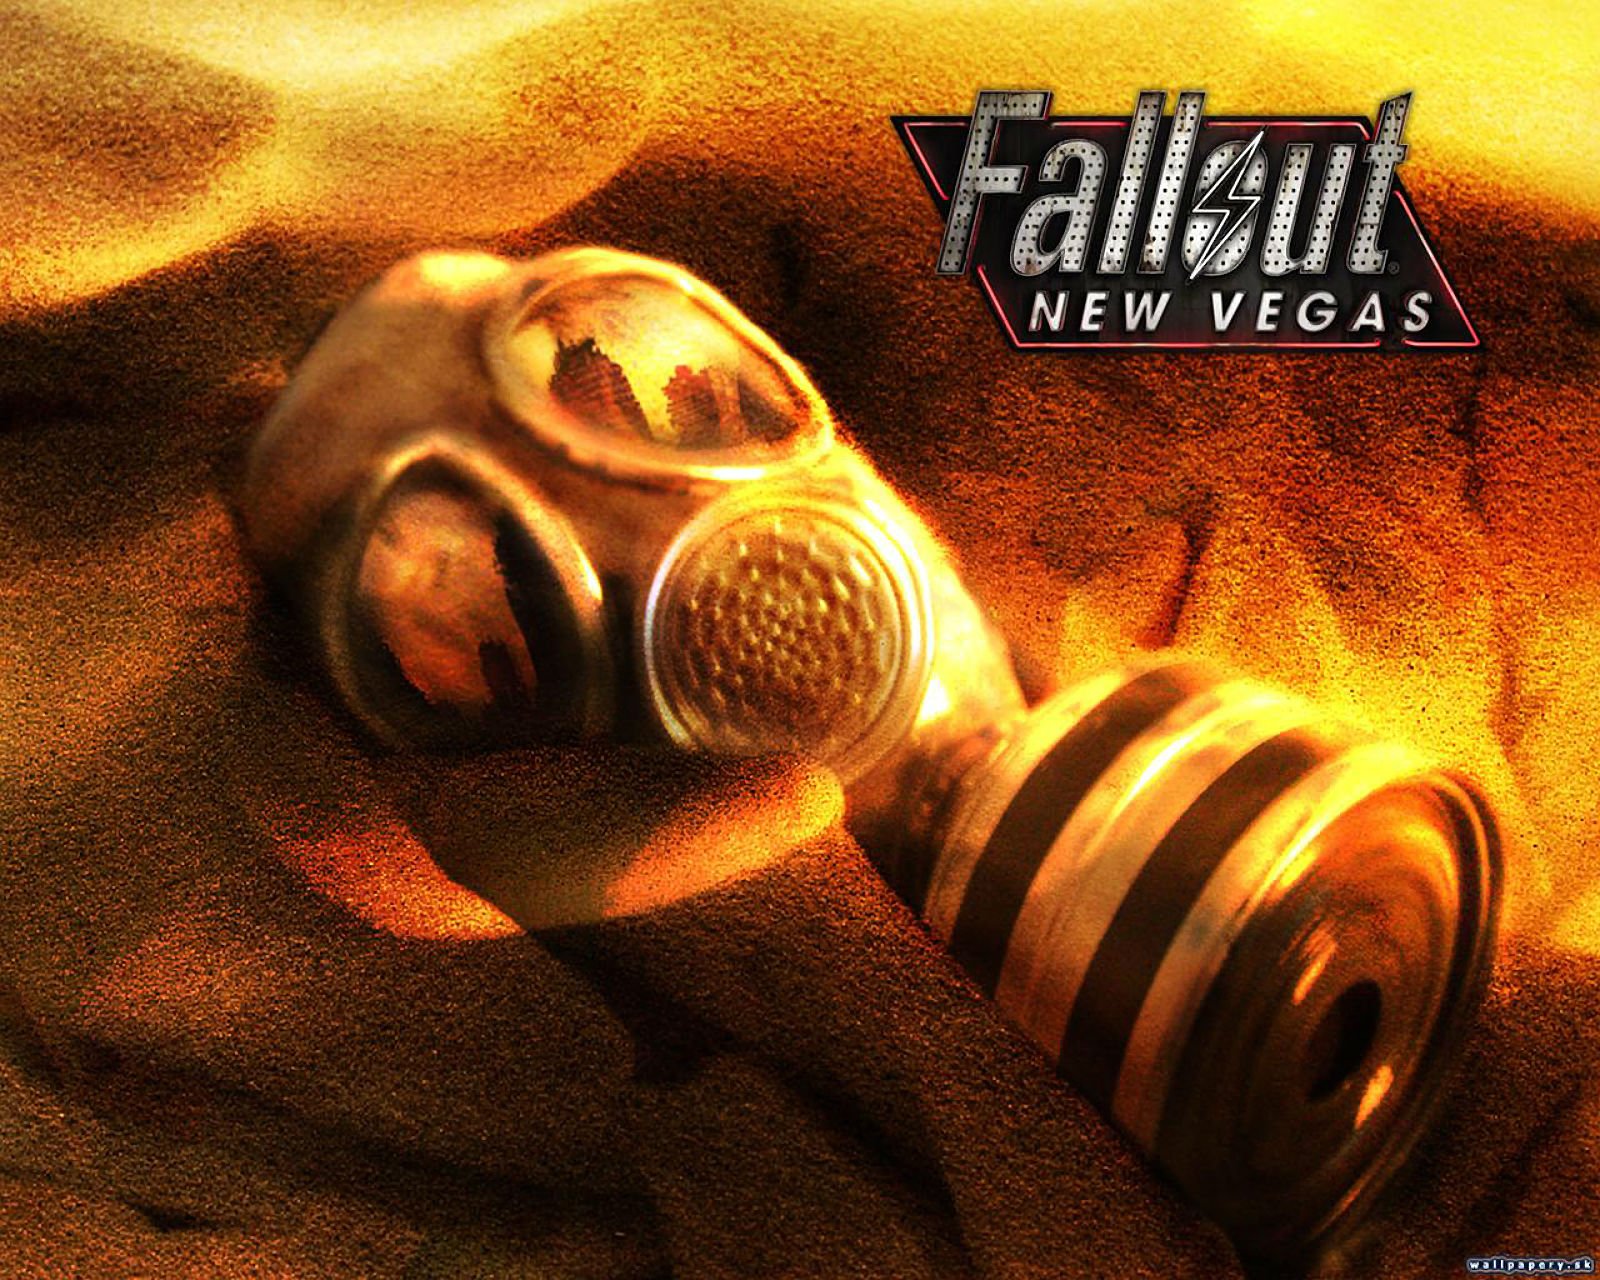 fallout, Sci fi, Warrior, Action, Fighting, Shooter, Sci fi, Futuristic, Apocalyptic, Poster Wallpaper